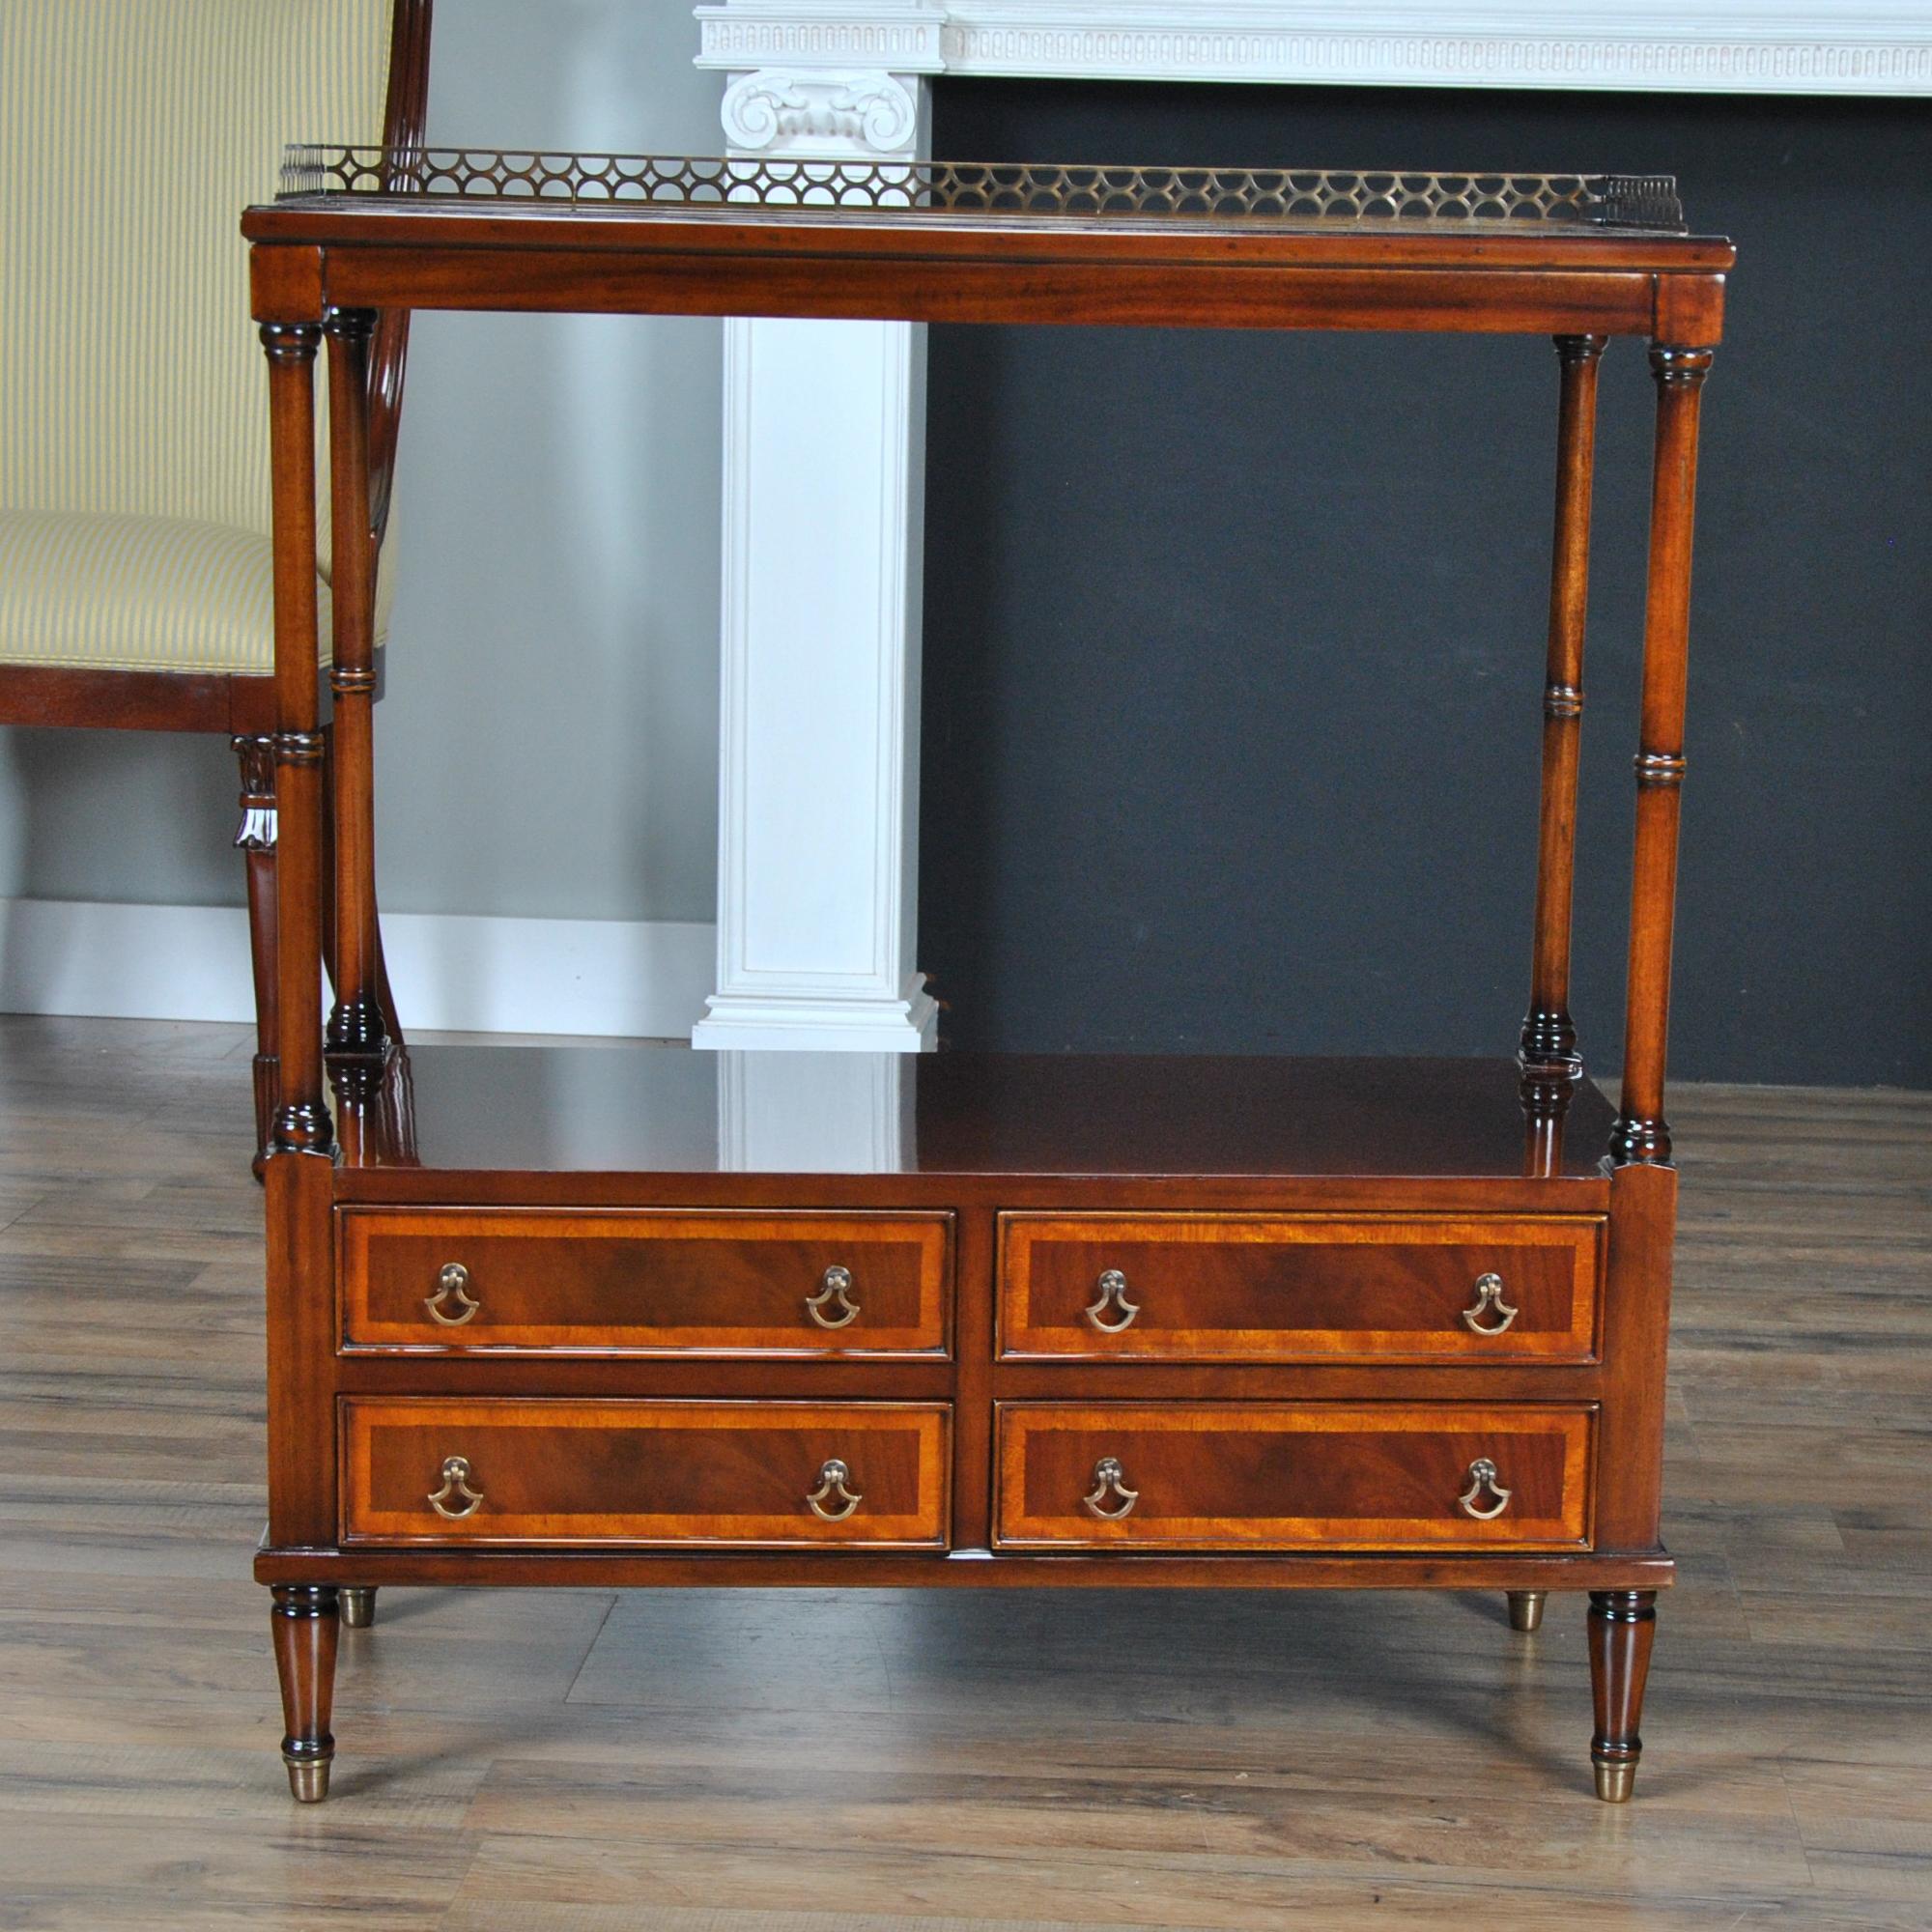 This beautiful Mahogany Serving Table is a great addition in the dining room. As a serving cart it features a brass gallery and fitted brass feet as well. Four satin wood banded drawers provide hidden storage while the shelf below and above are for